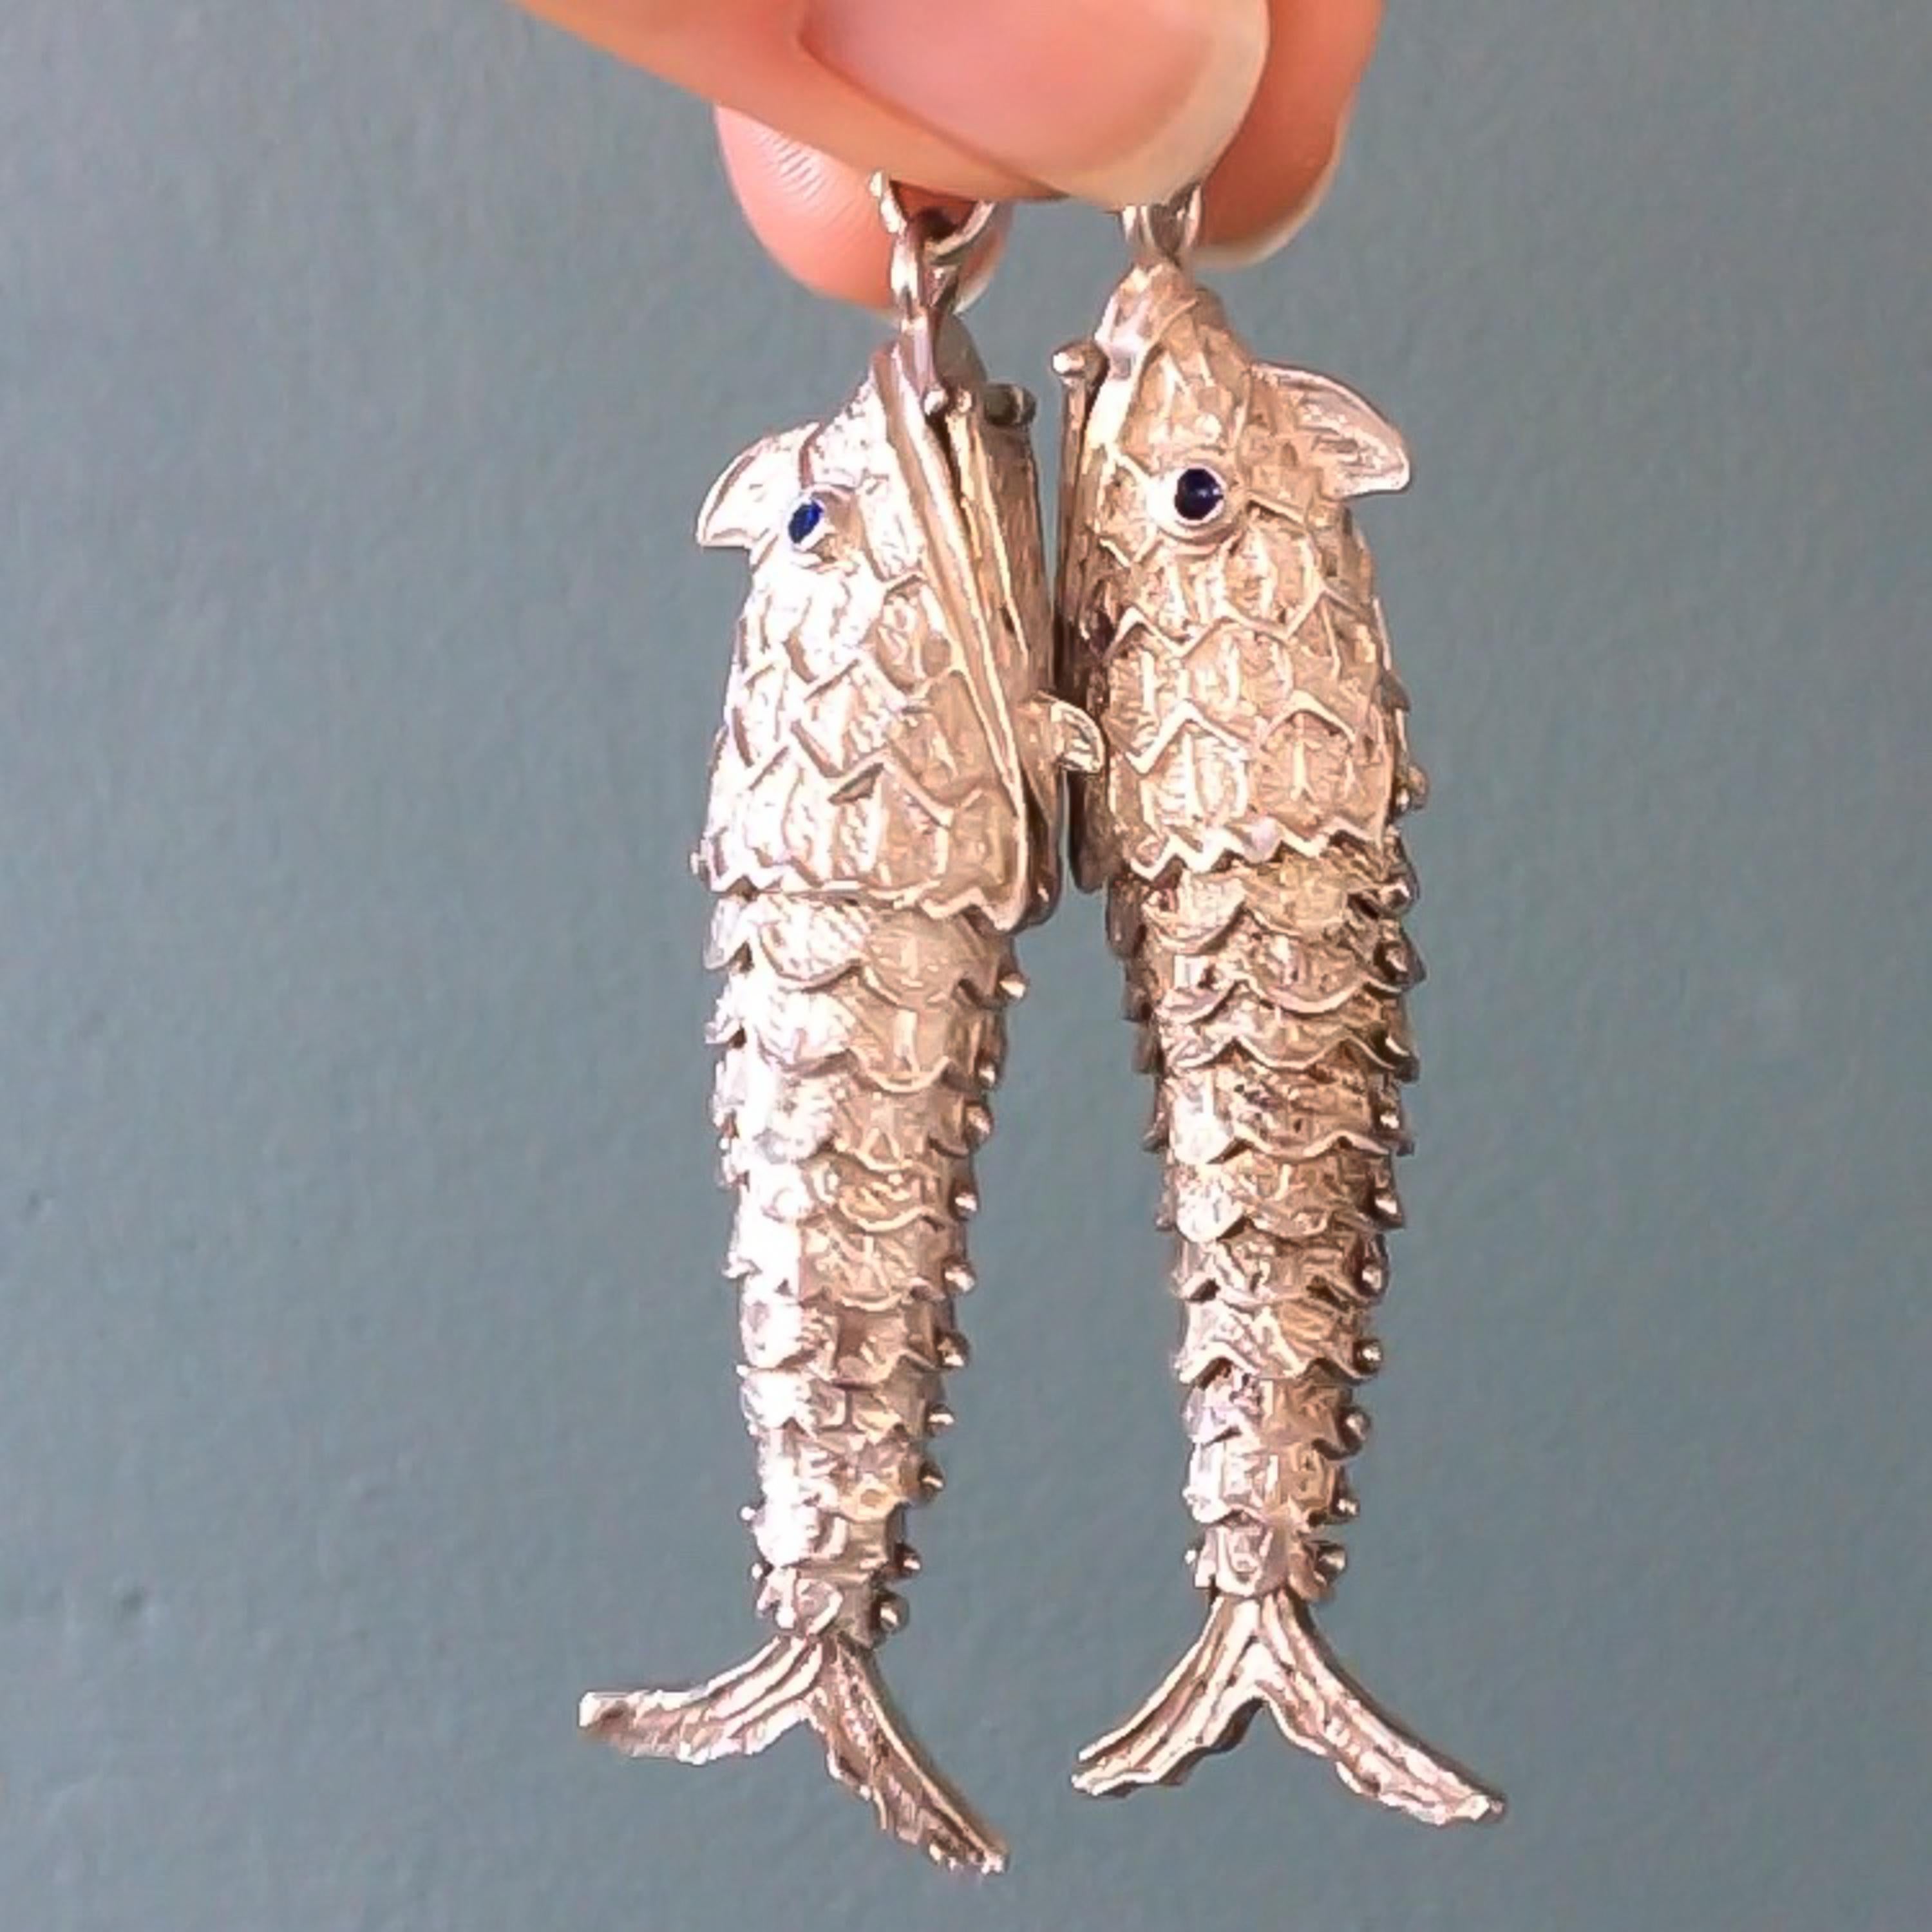 These two vintage articulated silver fish pendants are gorgeous. The fish are moving and wiggle their tails and body. The fish consist of multiple sections, which inside are held together by pins that allow the fish to move back and forth. The